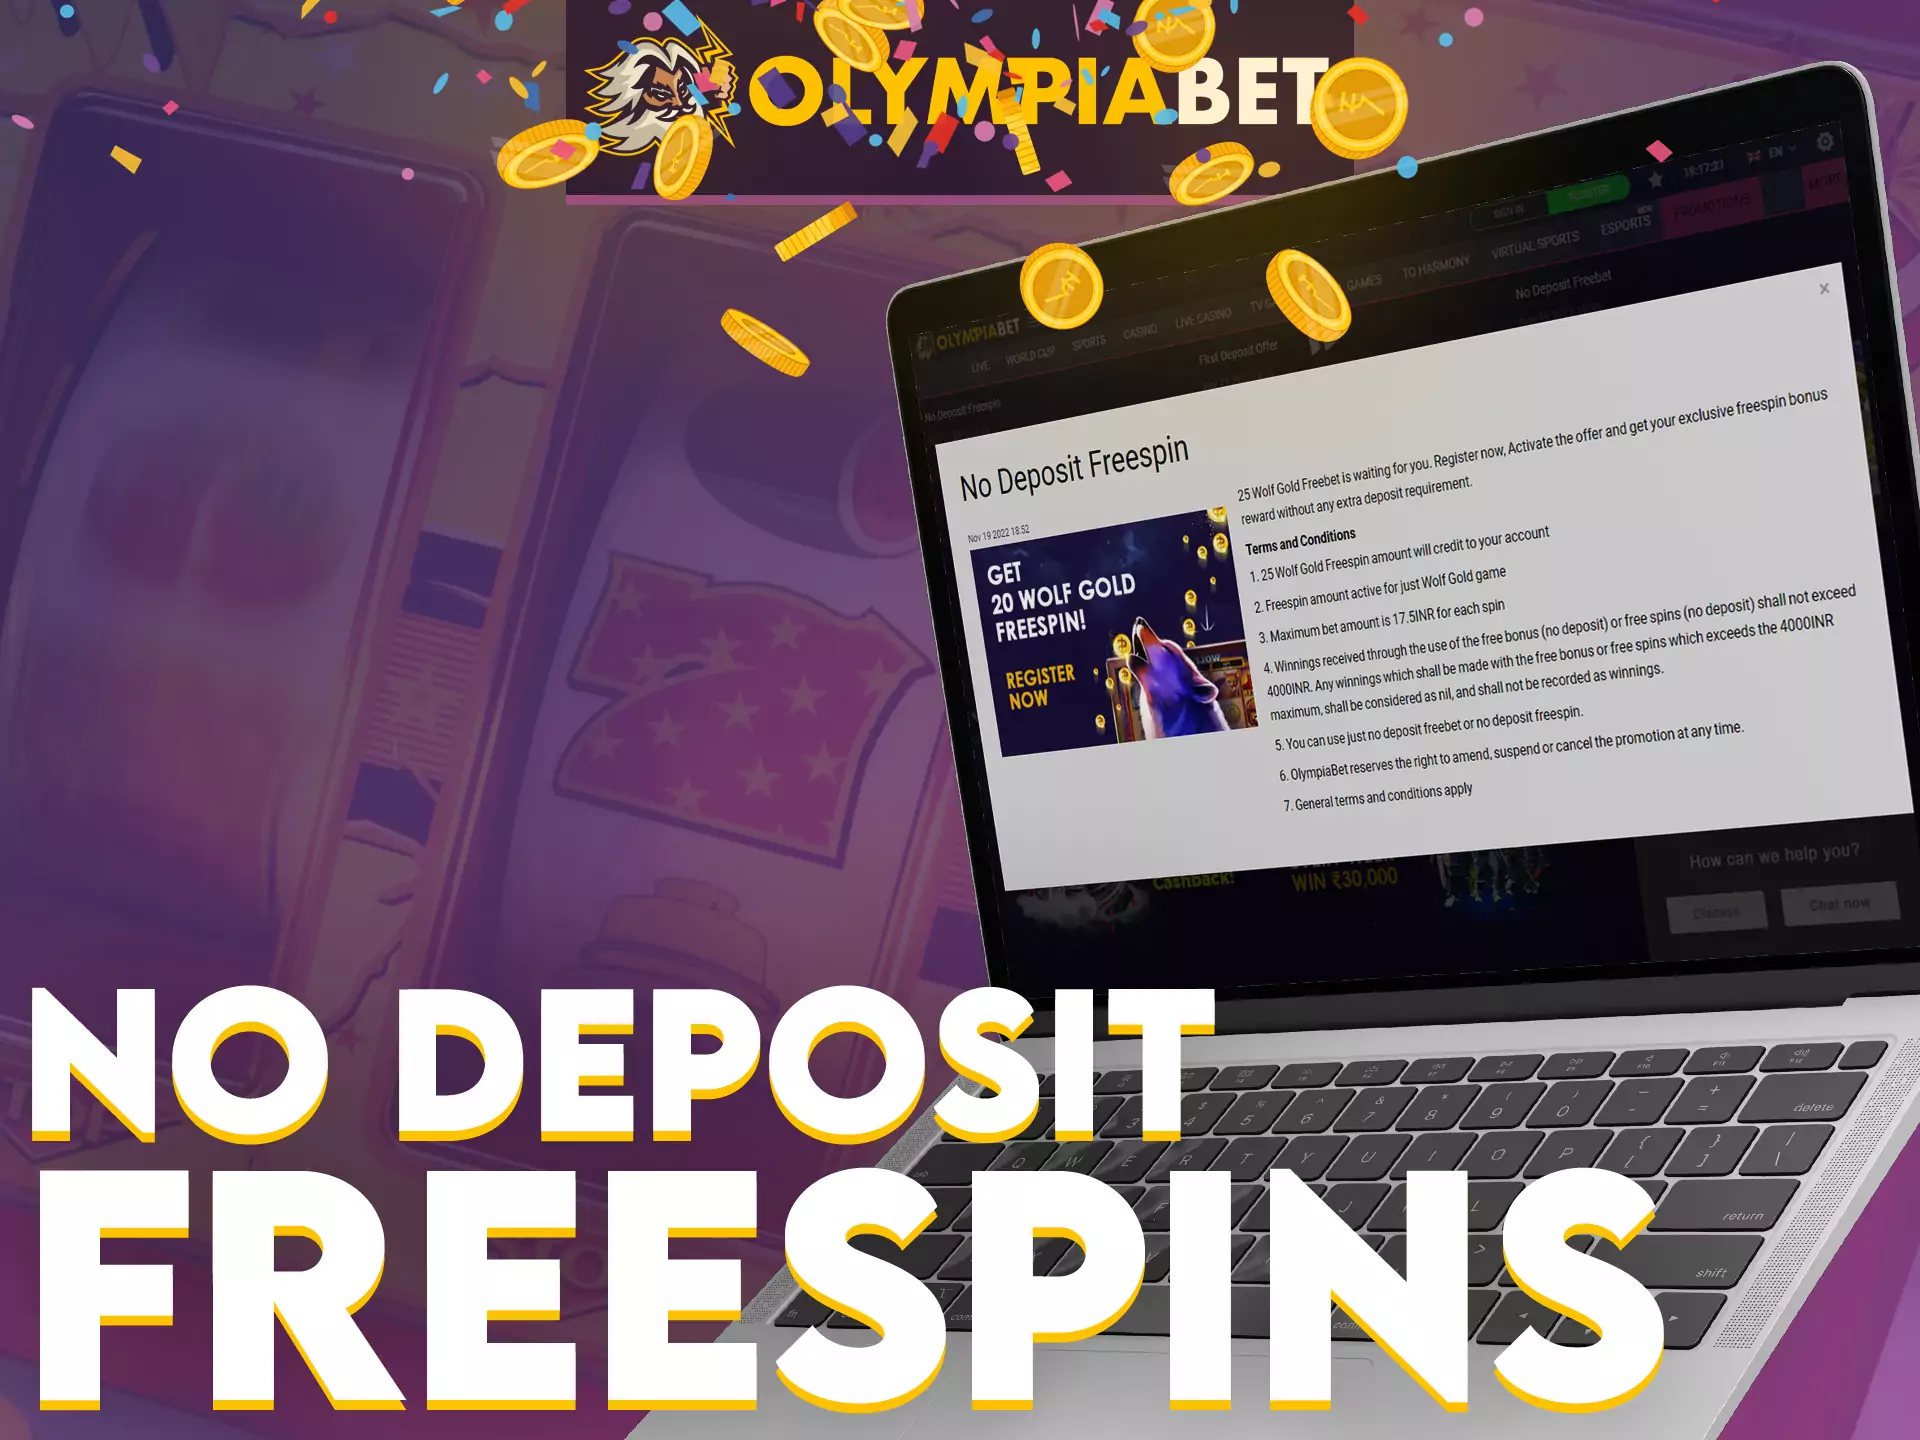 Join OlympiaBet and get 25 FS as a gift with no minimum deposit.